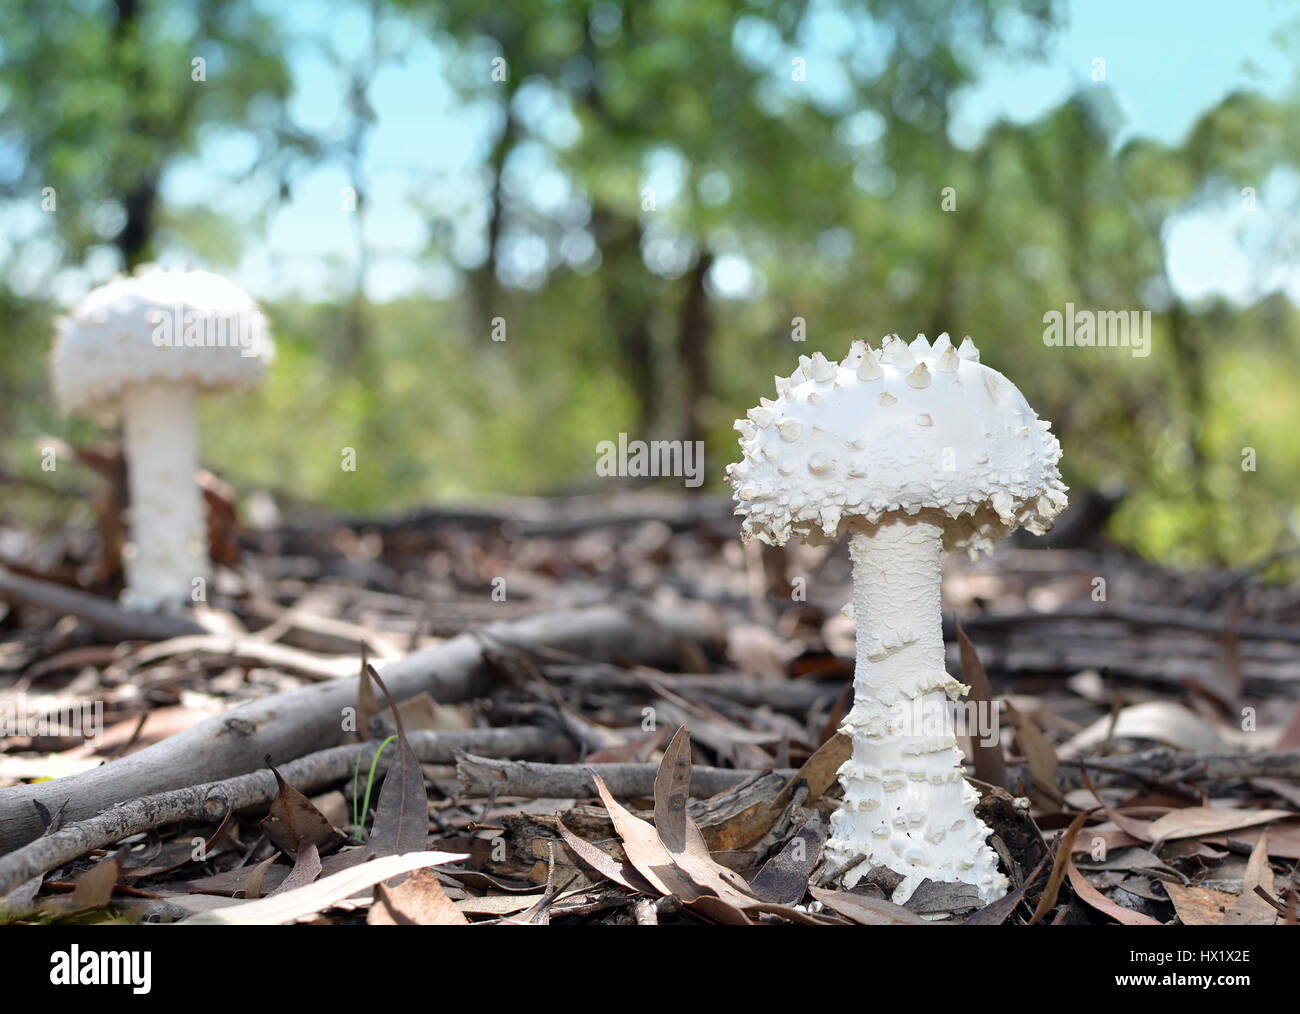 White puffy Amanita mushrooms (fungi) with warts or spikes growing on the Australian forest floor Stock Photo